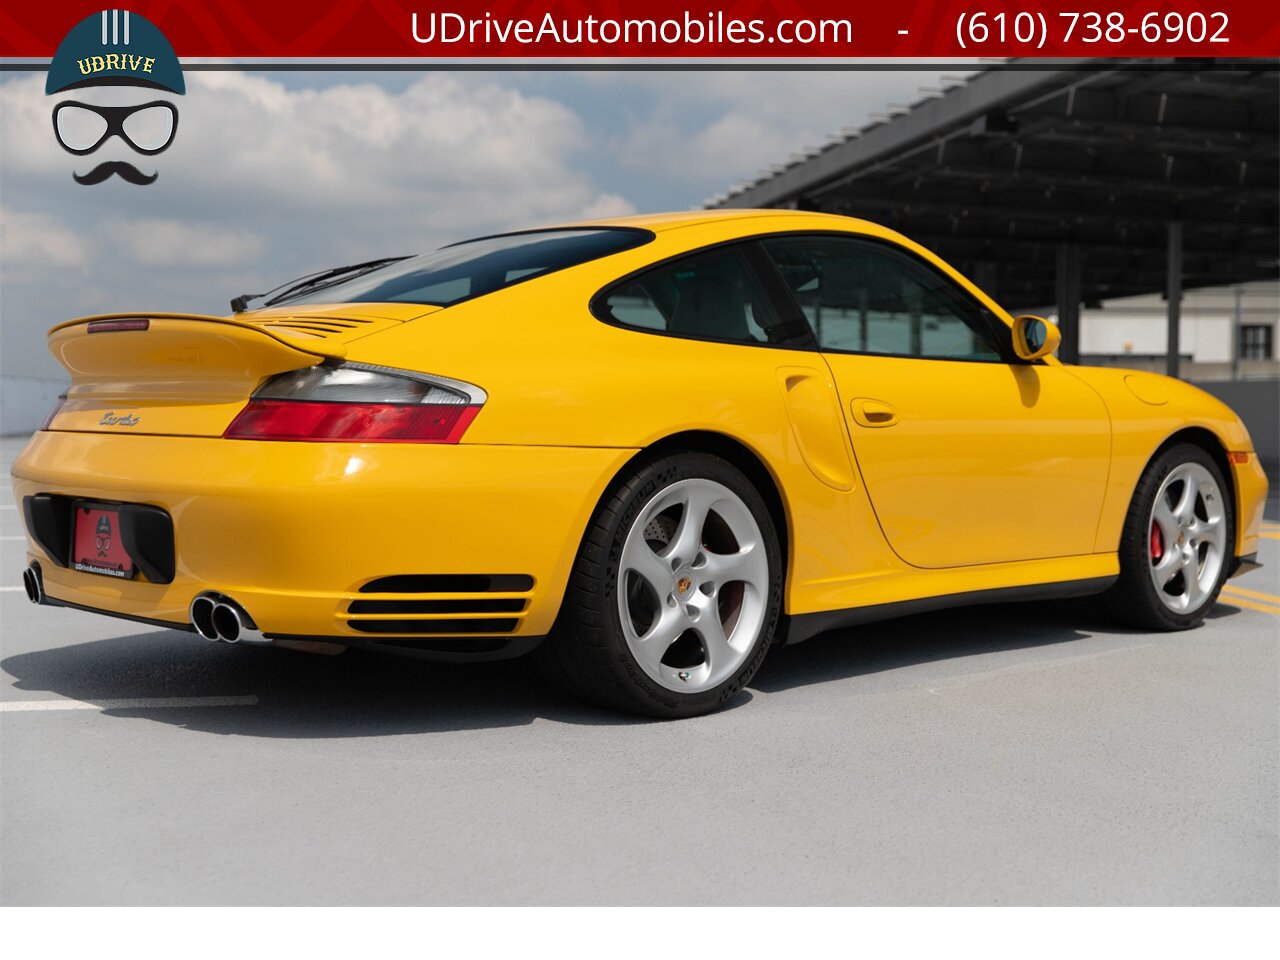 2003 Porsche 911 996 Turbo X50 6Sp Nephrite Green Lthr 9k Miles  Deviating Yellow Stitching Collector Grade BACK AGAIN - Photo 16 - West Chester, PA 19382